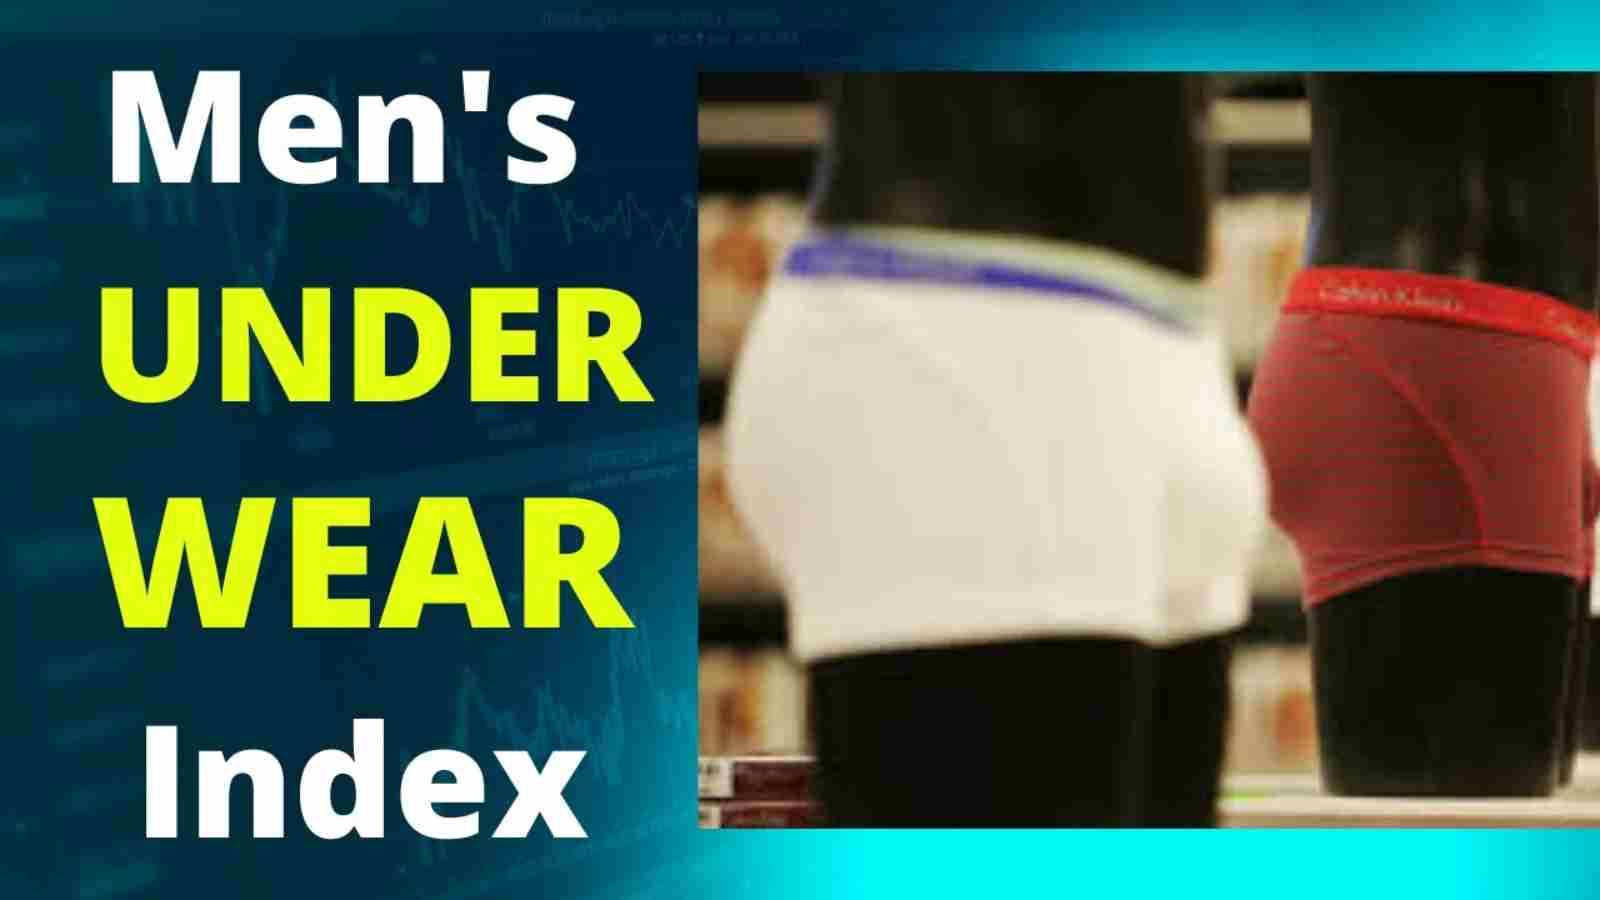 How Men's Underwear Sales Can Help Forecast Recessions